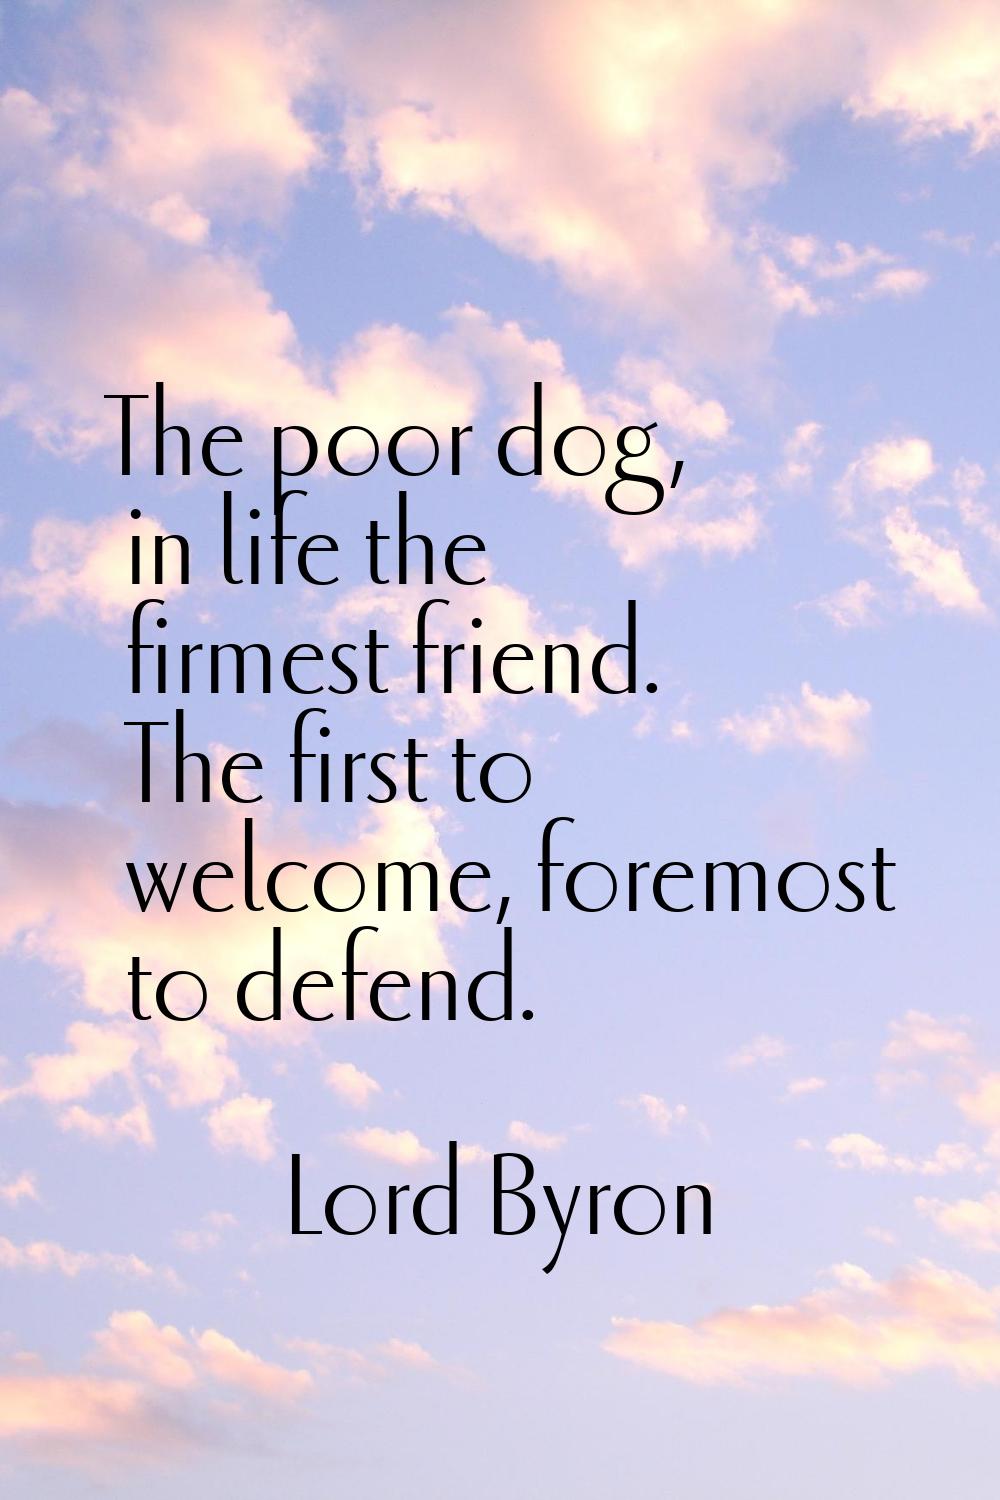 The poor dog, in life the firmest friend. The first to welcome, foremost to defend.